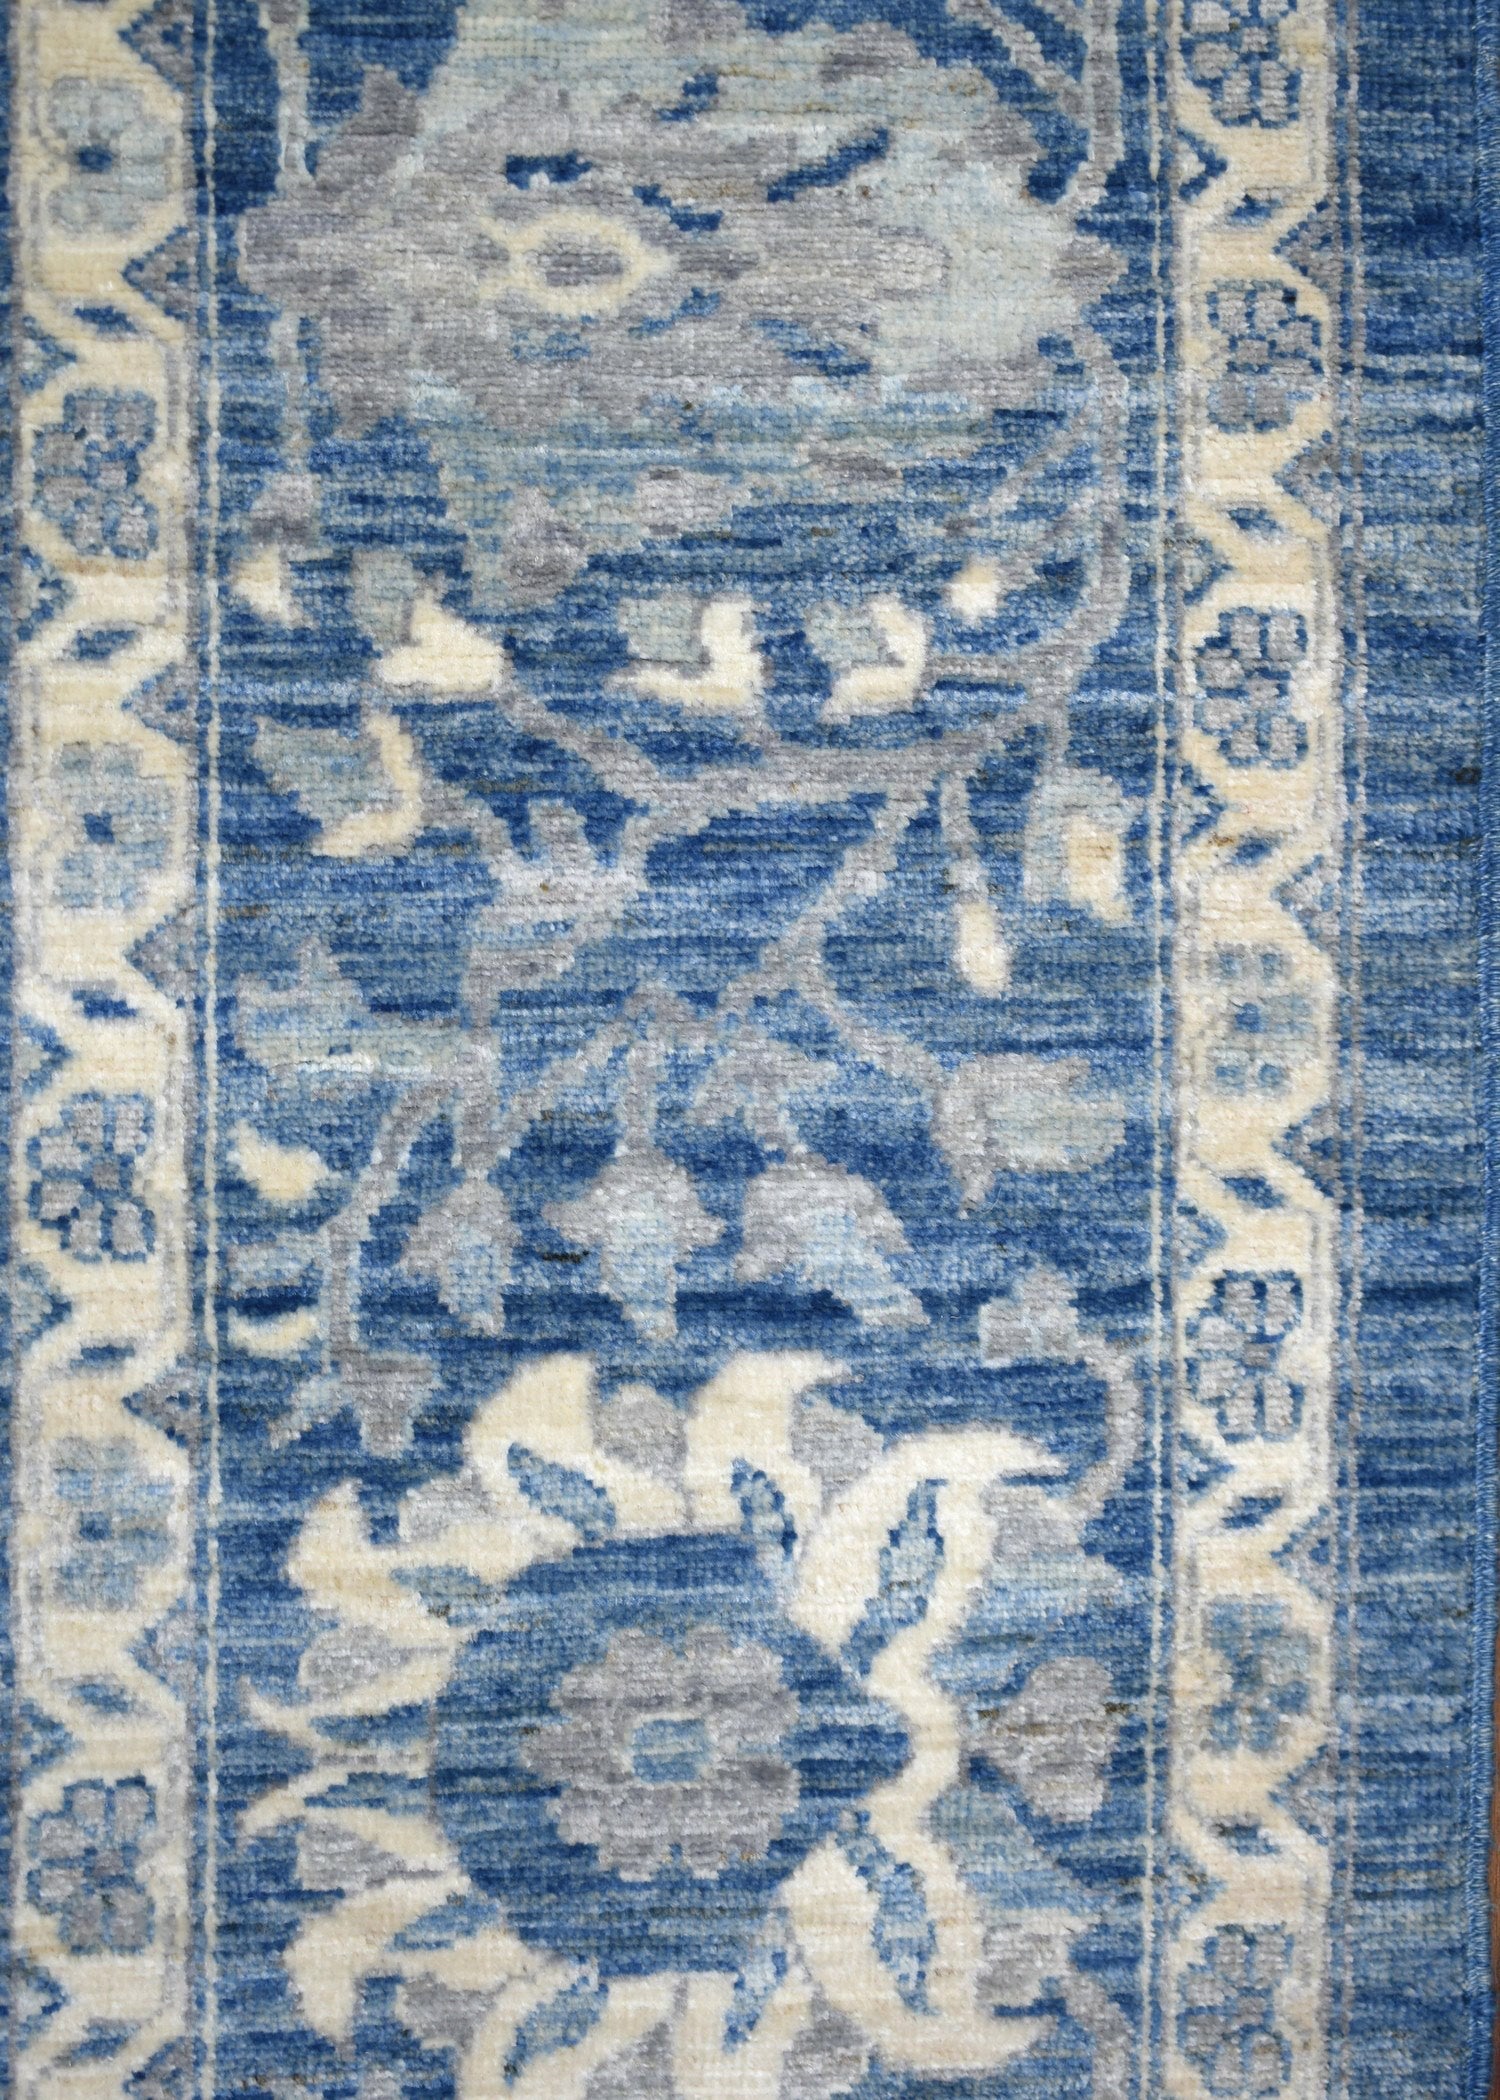 Sultanabad Handwoven Transitional Rug, J64165